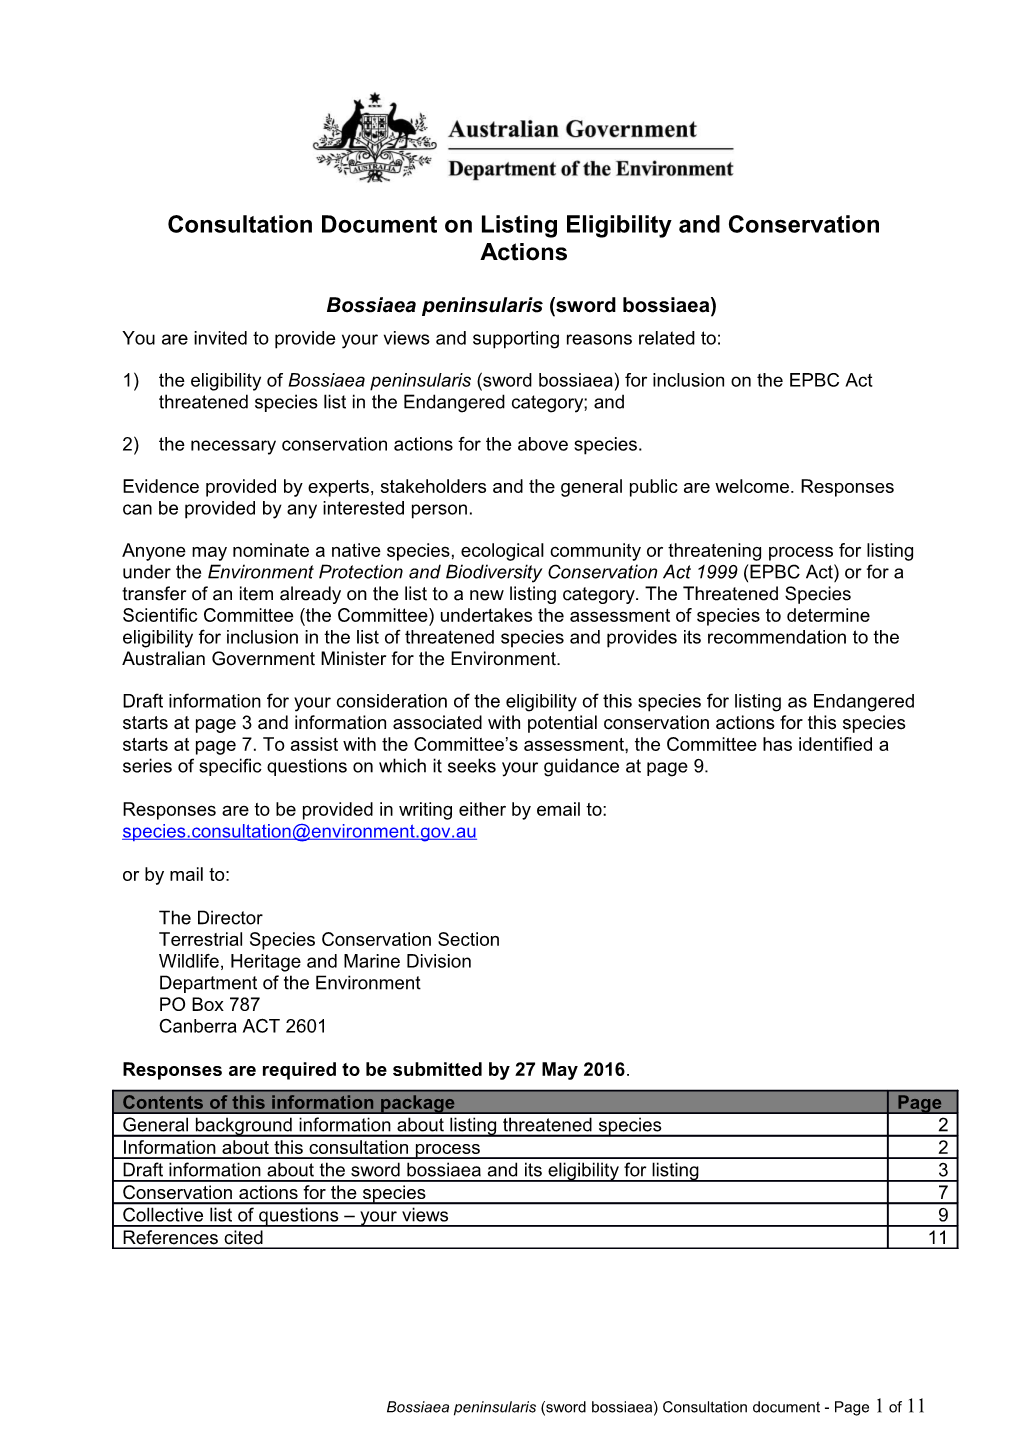 Consultation Document on Listing Eligibility and Conservation Actions Bossiaea Peninsularis